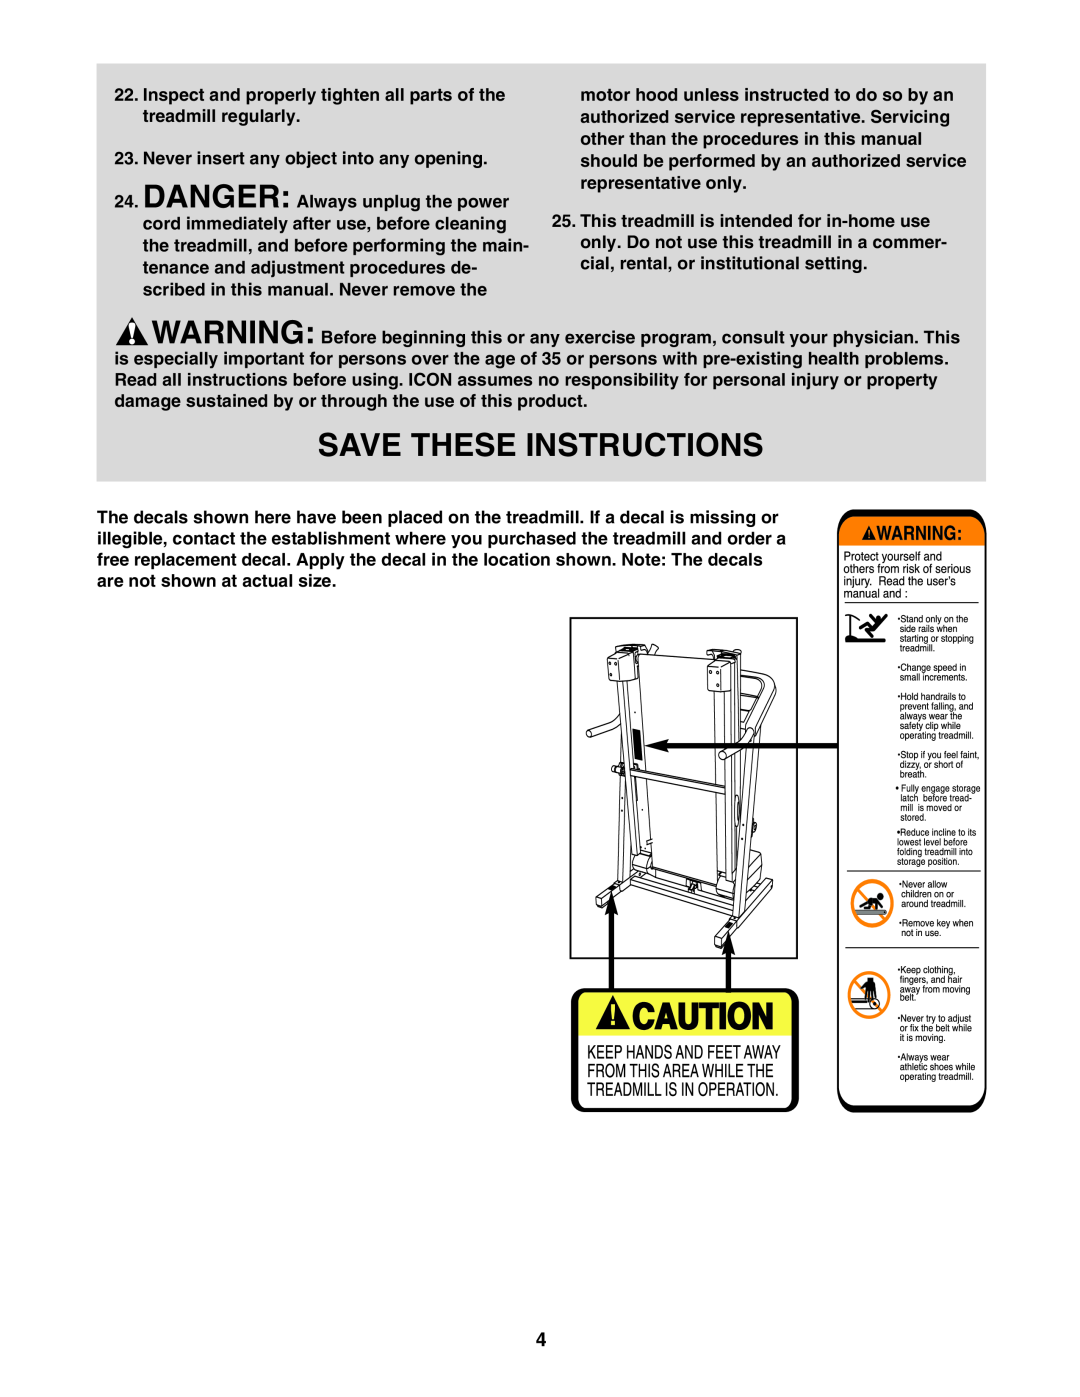 ProForm PMTL32706.0 user manual Save These Instructions, Inspect and properly tighten all parts of the treadmill regularly 